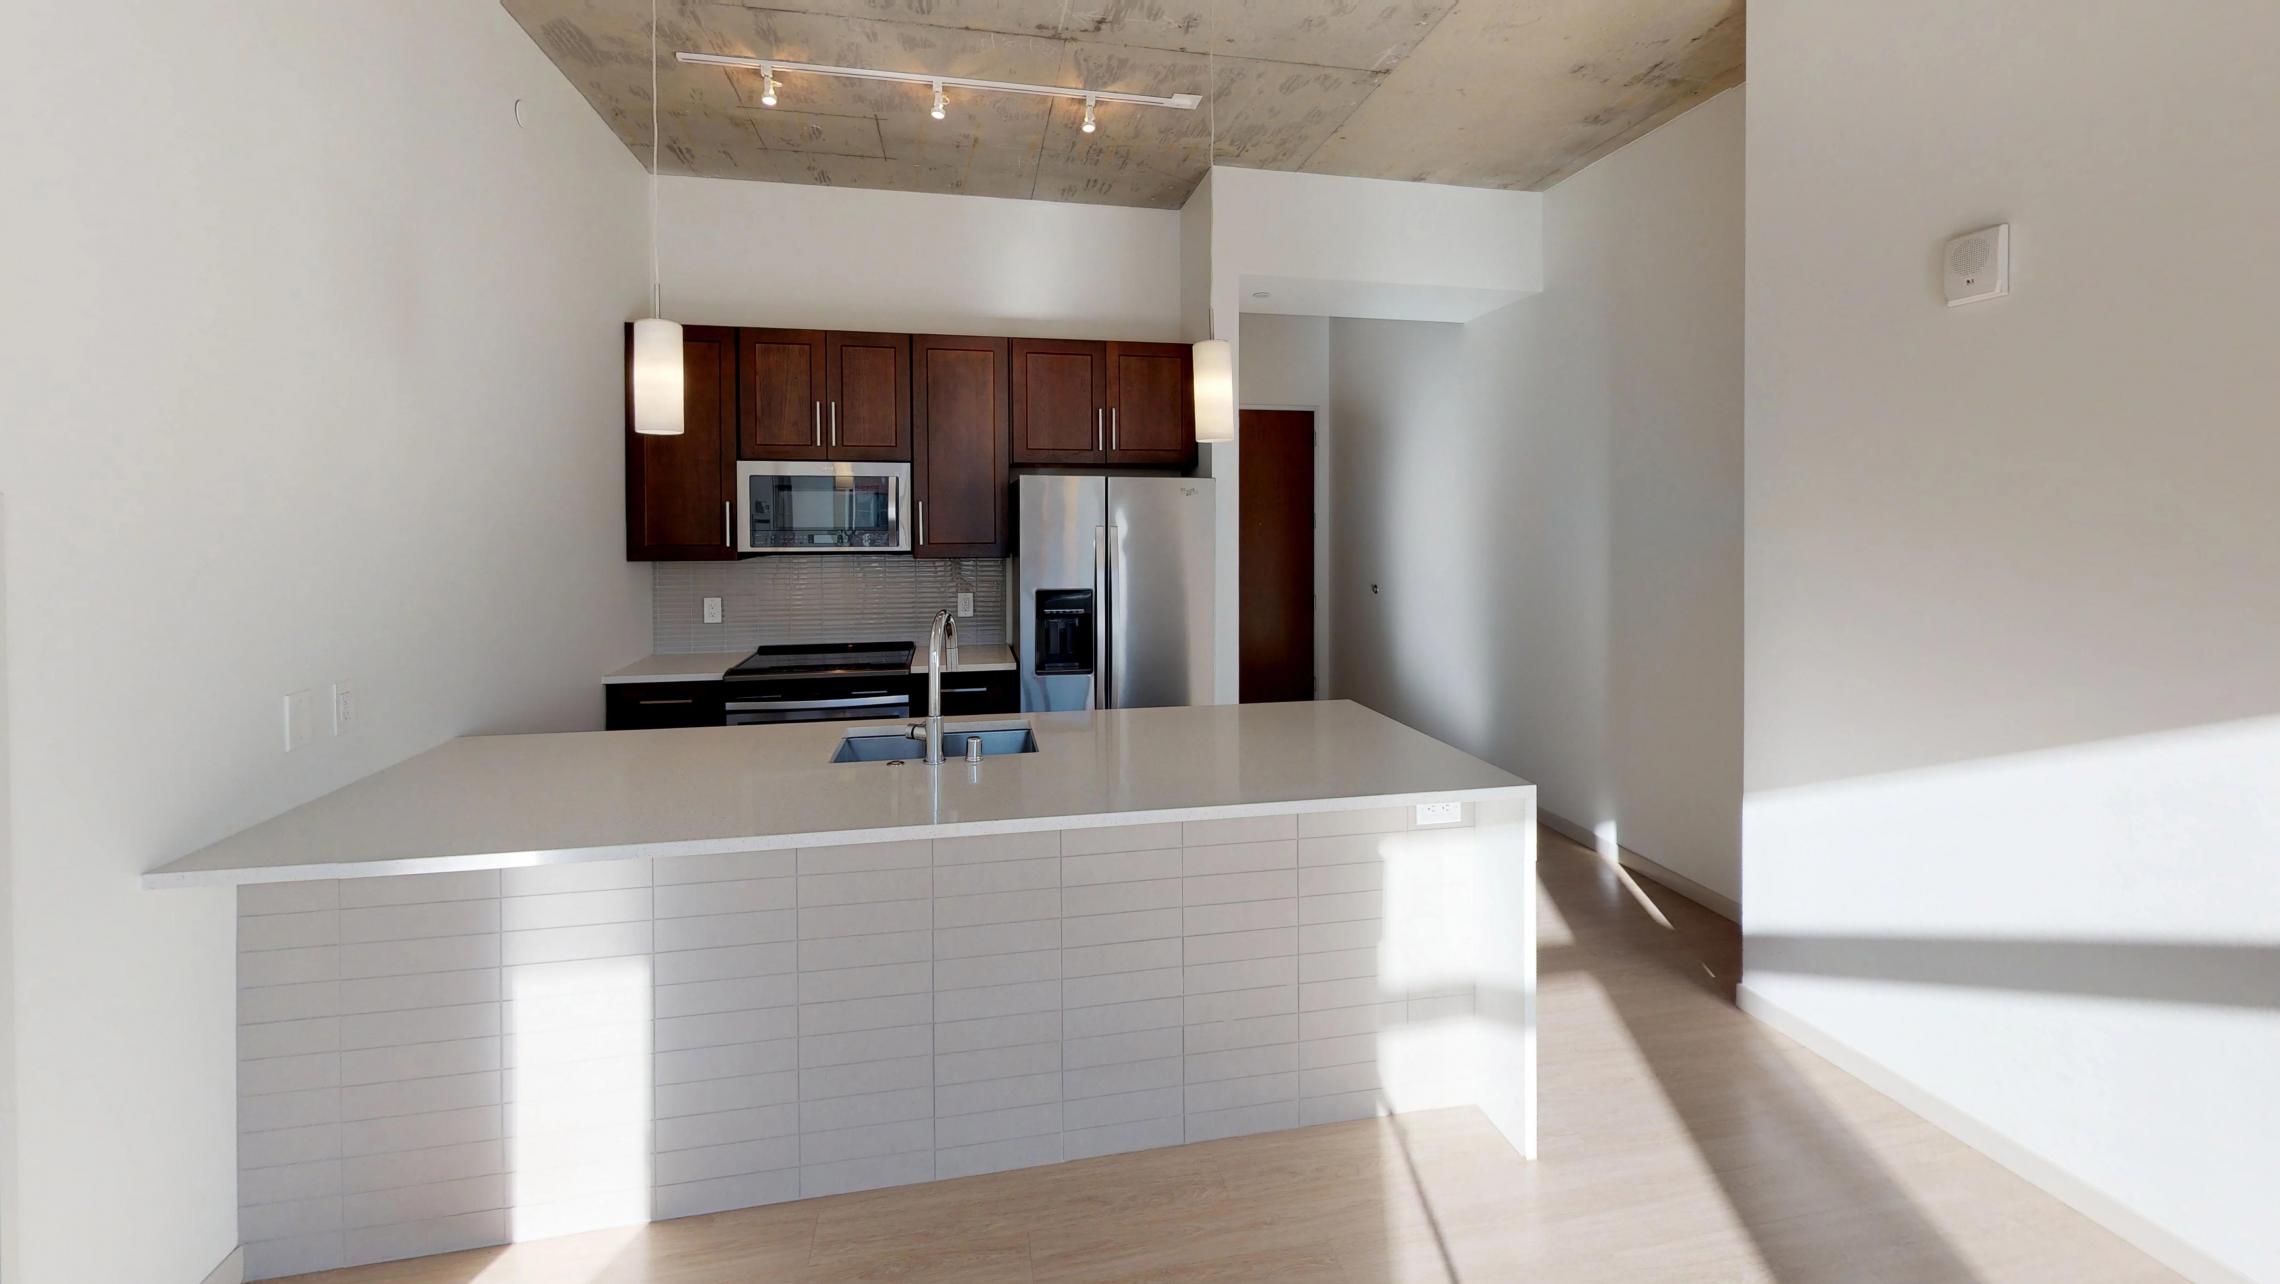 Pressman-311-Apartment-One-Bedroom-Luxury-Modern-Upscale-Downtown-Capitol-Concrete-Madison-Kitchen-Island-Living-Room-Sunny-Bright.jpg